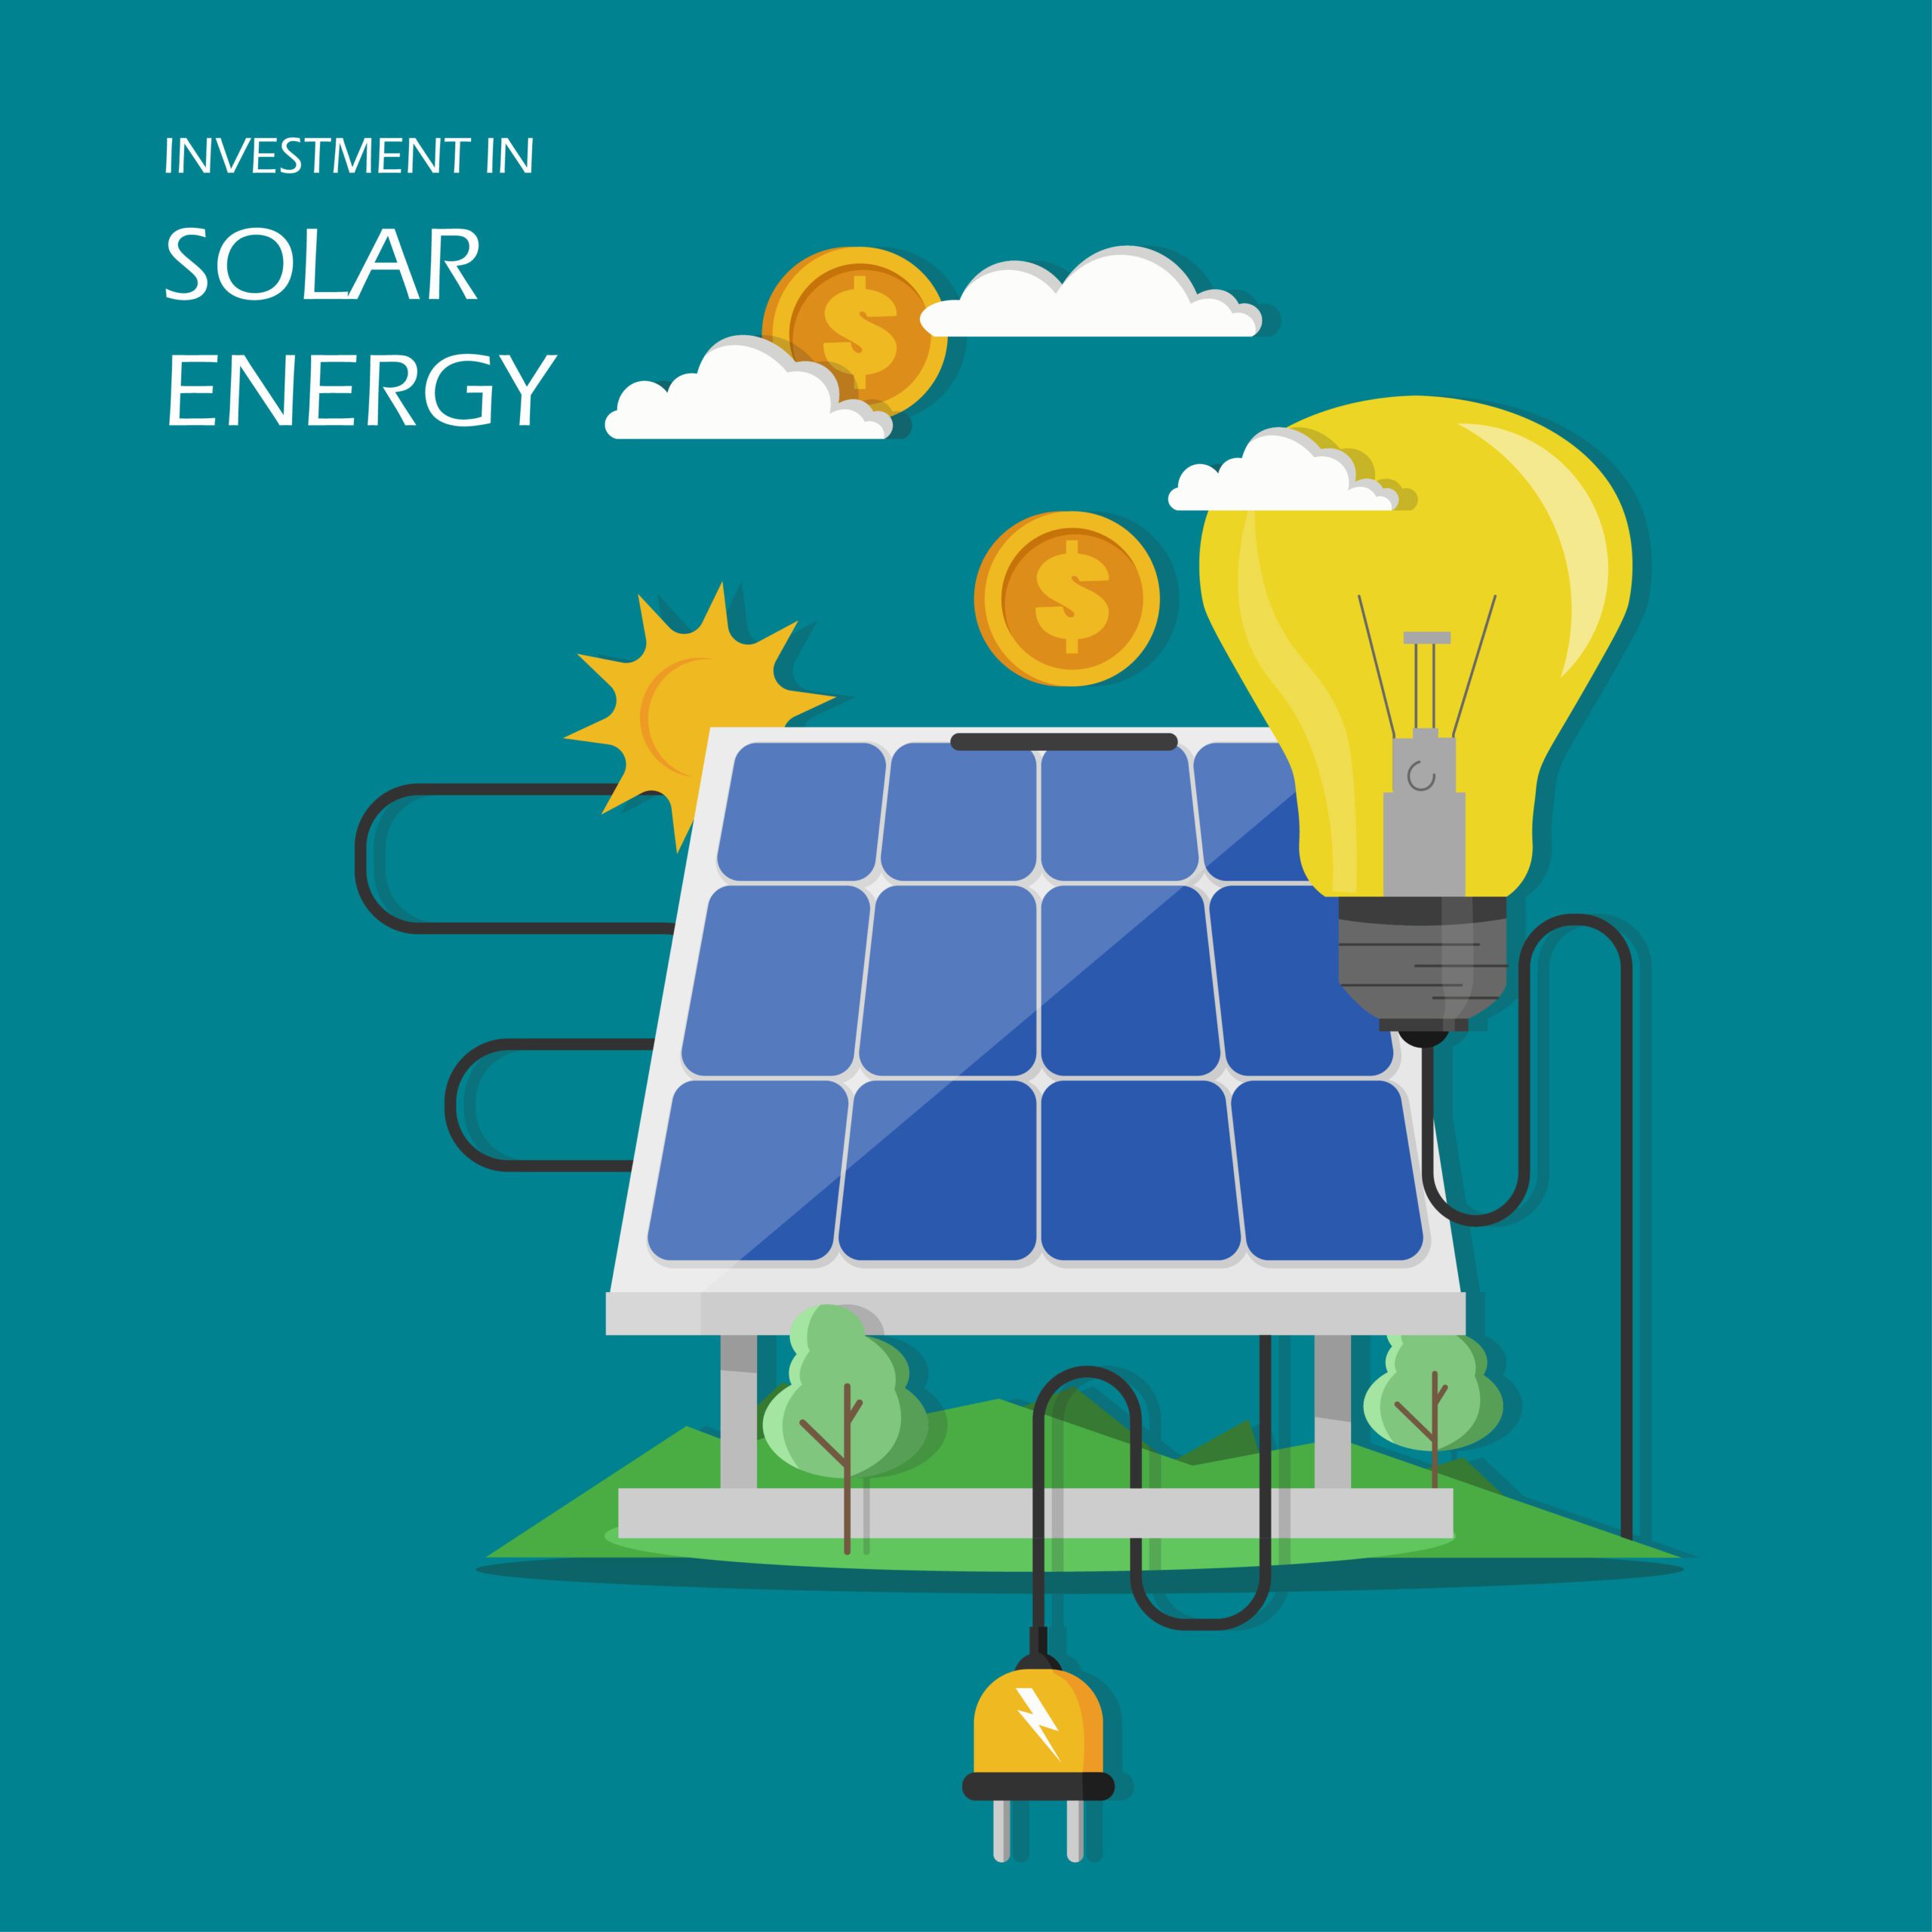 An infographic showing how solar power investments can power homes.